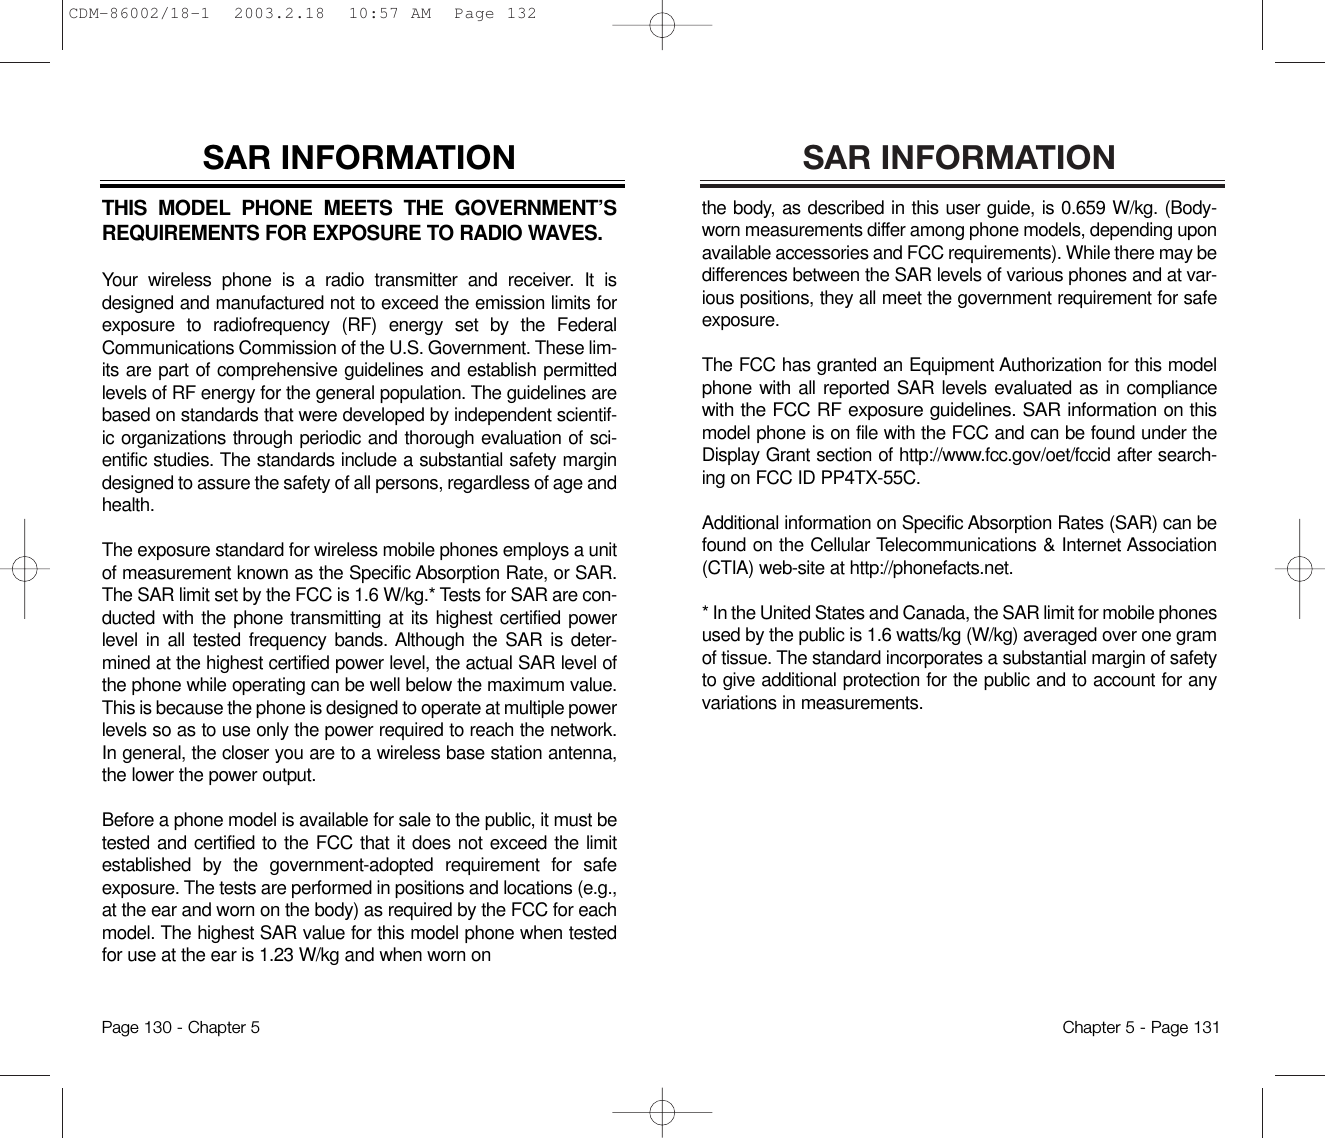 SAR INFORMATIONthe body, as described in this user guide, is 0.659 W/kg. (Body-worn measurements differ among phone models, depending uponavailable accessories and FCC requirements). While there may bedifferences between the SAR levels of various phones and at var-ious positions, they all meet the government requirement for safeexposure.The FCC has granted an Equipment Authorization for this modelphone with all reported SAR levels evaluated as in compliancewith the FCC RF exposure guidelines. SAR information on thismodel phone is on file with the FCC and can be found under theDisplay Grant section of http://www.fcc.gov/oet/fccid after search-ing on FCC ID PP4TX-55C. Additional information on Specific Absorption Rates (SAR) can befound on the Cellular Telecommunications &amp; Internet Association(CTIA) web-site at http://phonefacts.net.* In the United States and Canada, the SAR limit for mobile phonesused by the public is 1.6 watts/kg (W/kg) averaged over one gramof tissue. The standard incorporates a substantial margin of safetyto give additional protection for the public and to account for anyvariations in measurements.Chapter 5 - Page 131THIS MODEL PHONE MEETS THE GOVERNMENT’SREQUIREMENTS FOR EXPOSURE TO RADIO WAVES.Your wireless phone is a radio transmitter and receiver. It isdesigned and manufactured not to exceed the emission limits forexposure to radiofrequency (RF) energy set by the FederalCommunications Commission of the U.S. Government. These lim-its are part of comprehensive guidelines and establish permittedlevels of RF energy for the general population. The guidelines arebased on standards that were developed by independent scientif-ic organizations through periodic and thorough evaluation of sci-entific studies. The standards include a substantial safety margindesigned to assure the safety of all persons, regardless of age andhealth.The exposure standard for wireless mobile phones employs a unitof measurement known as the Specific Absorption Rate, or SAR.The SAR limit set by the FCC is 1.6 W/kg.* Tests for SAR are con-ducted with the phone transmitting at its highest certified powerlevel in all tested frequency bands. Although the SAR is deter-mined at the highest certified power level, the actual SAR level ofthe phone while operating can be well below the maximum value.This is because the phone is designed to operate at multiple powerlevels so as to use only the power required to reach the network.In general, the closer you are to a wireless base station antenna,the lower the power output. Before a phone model is available for sale to the public, it must betested and certified to the FCC that it does not exceed the limitestablished by the government-adopted requirement for safeexposure. The tests are performed in positions and locations (e.g.,at the ear and worn on the body) as required by the FCC for eachmodel. The highest SAR value for this model phone when testedfor use at the ear is 1.23 W/kg and when worn on SAR INFORMATIONPage 130 - Chapter 5CDM-86002/18-1  2003.2.18  10:57 AM  Page 132